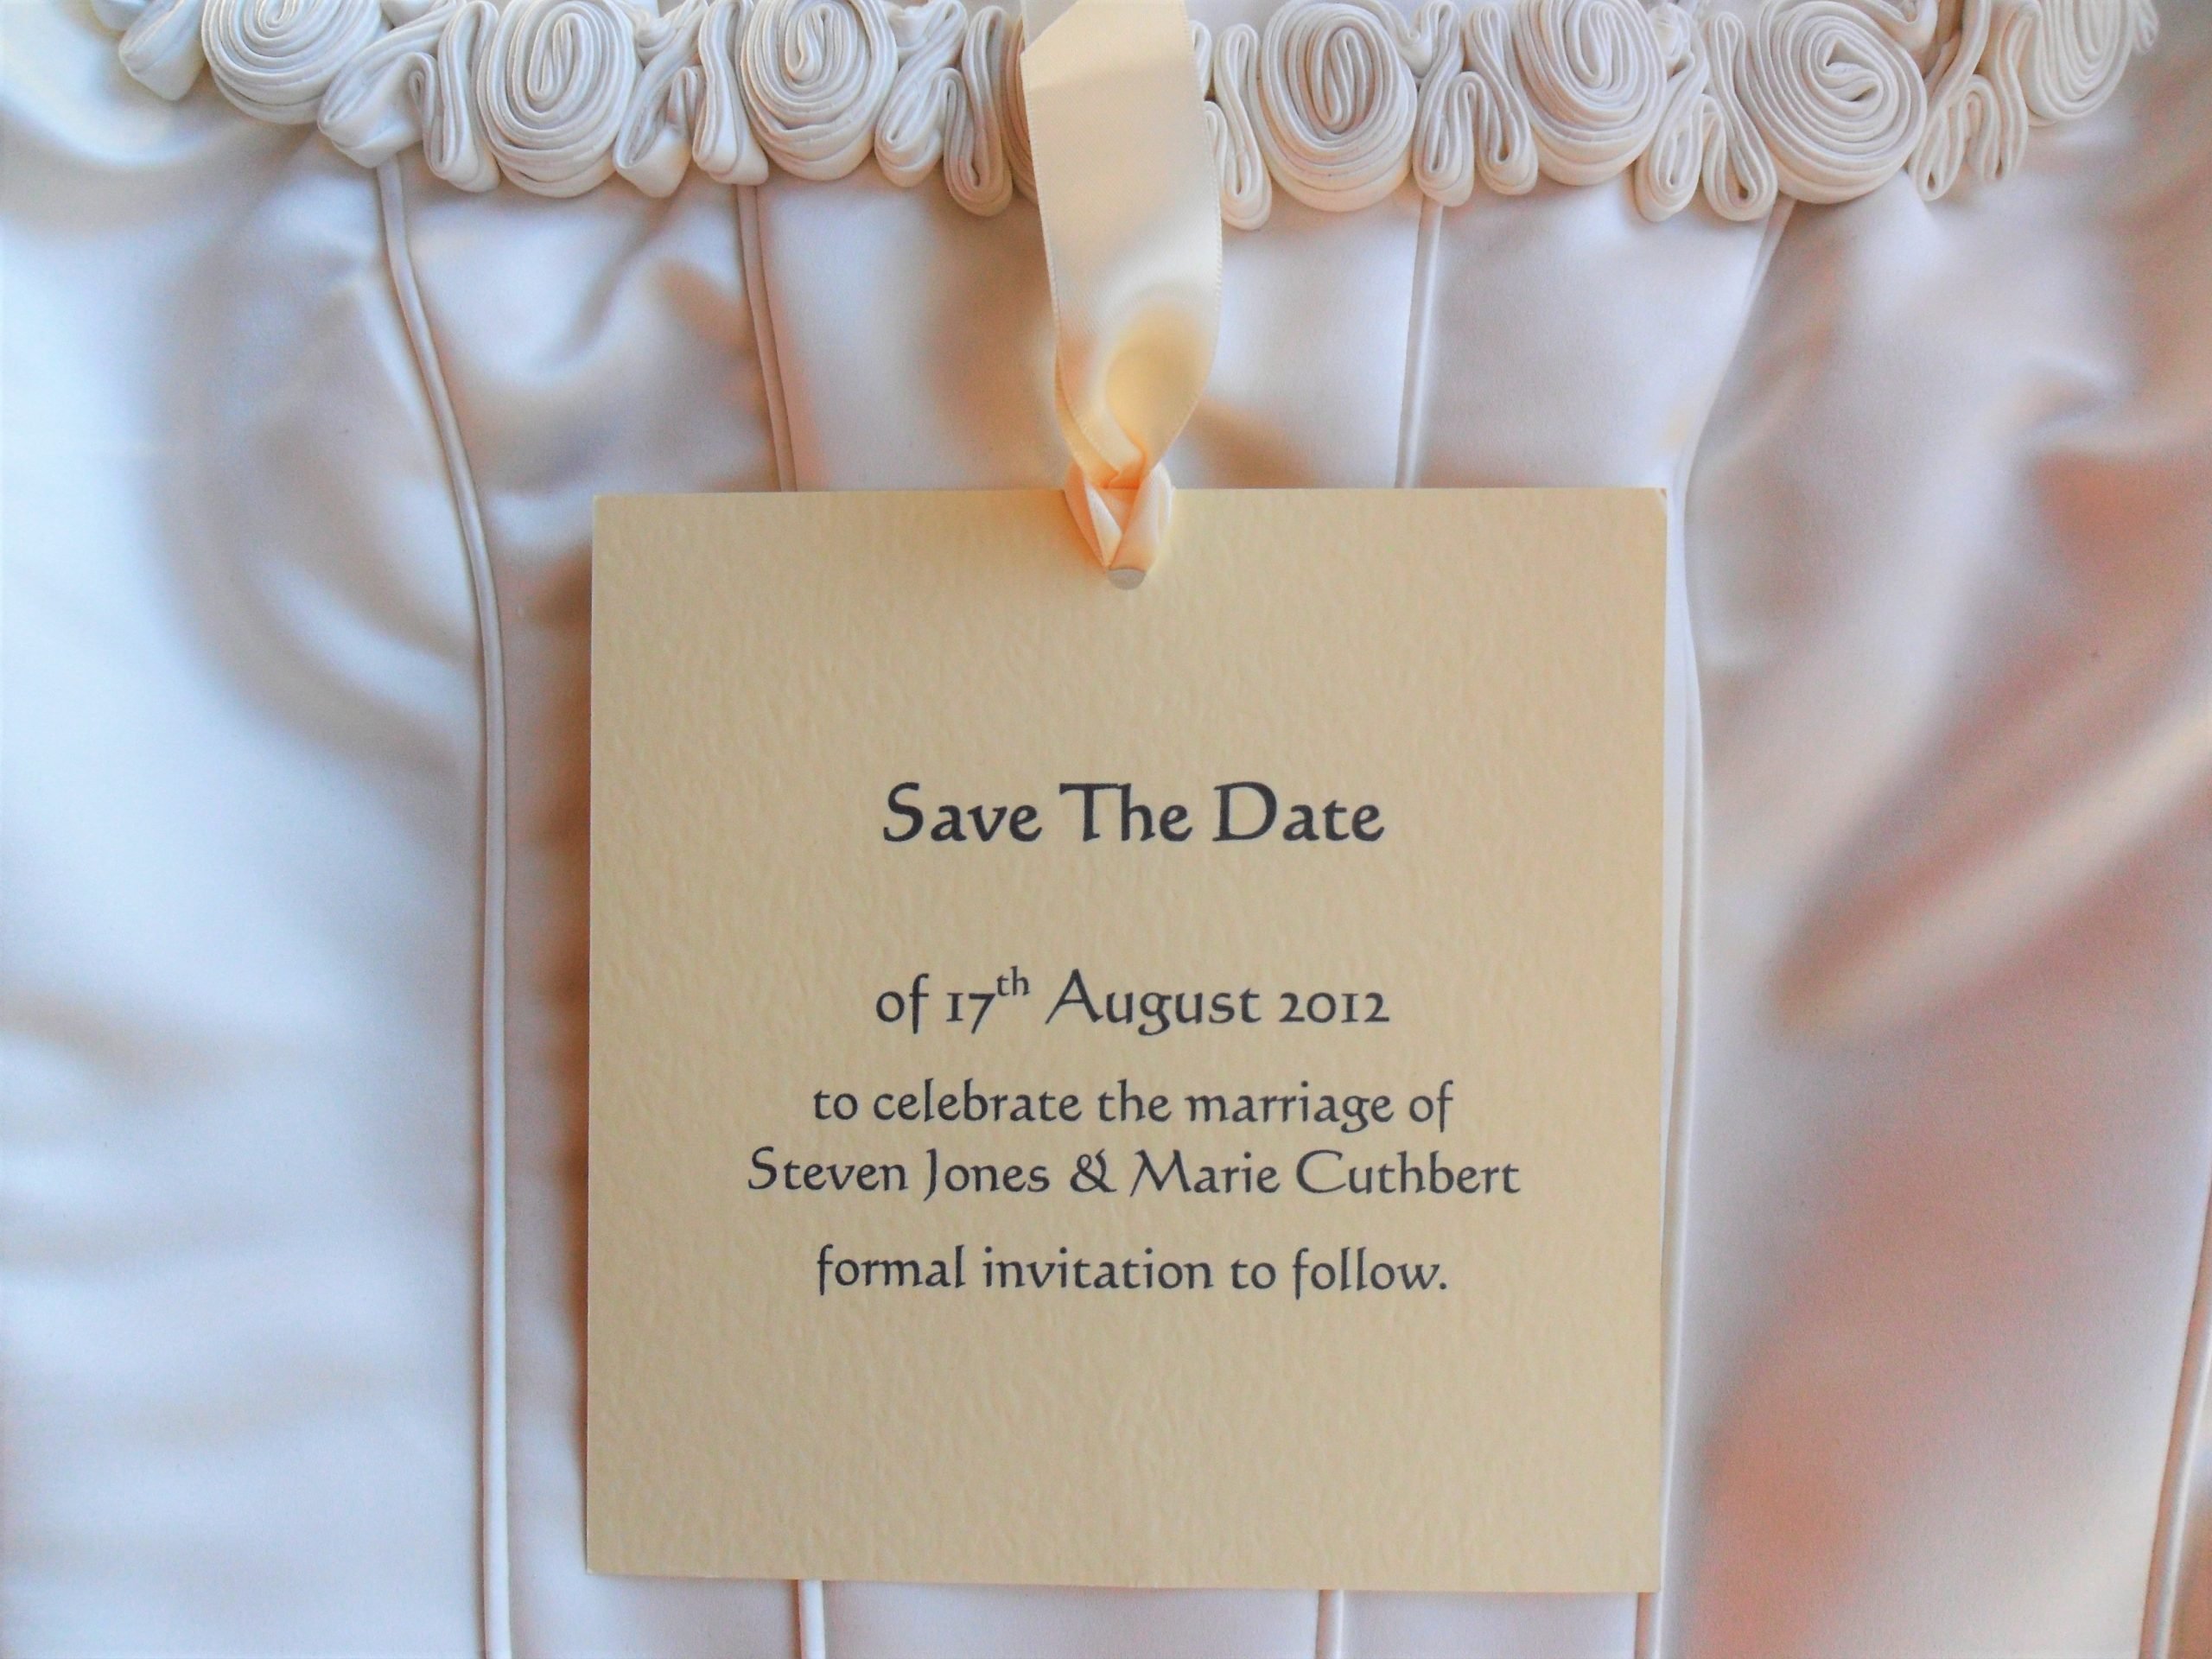 Chantilly Save The Date Cards £1